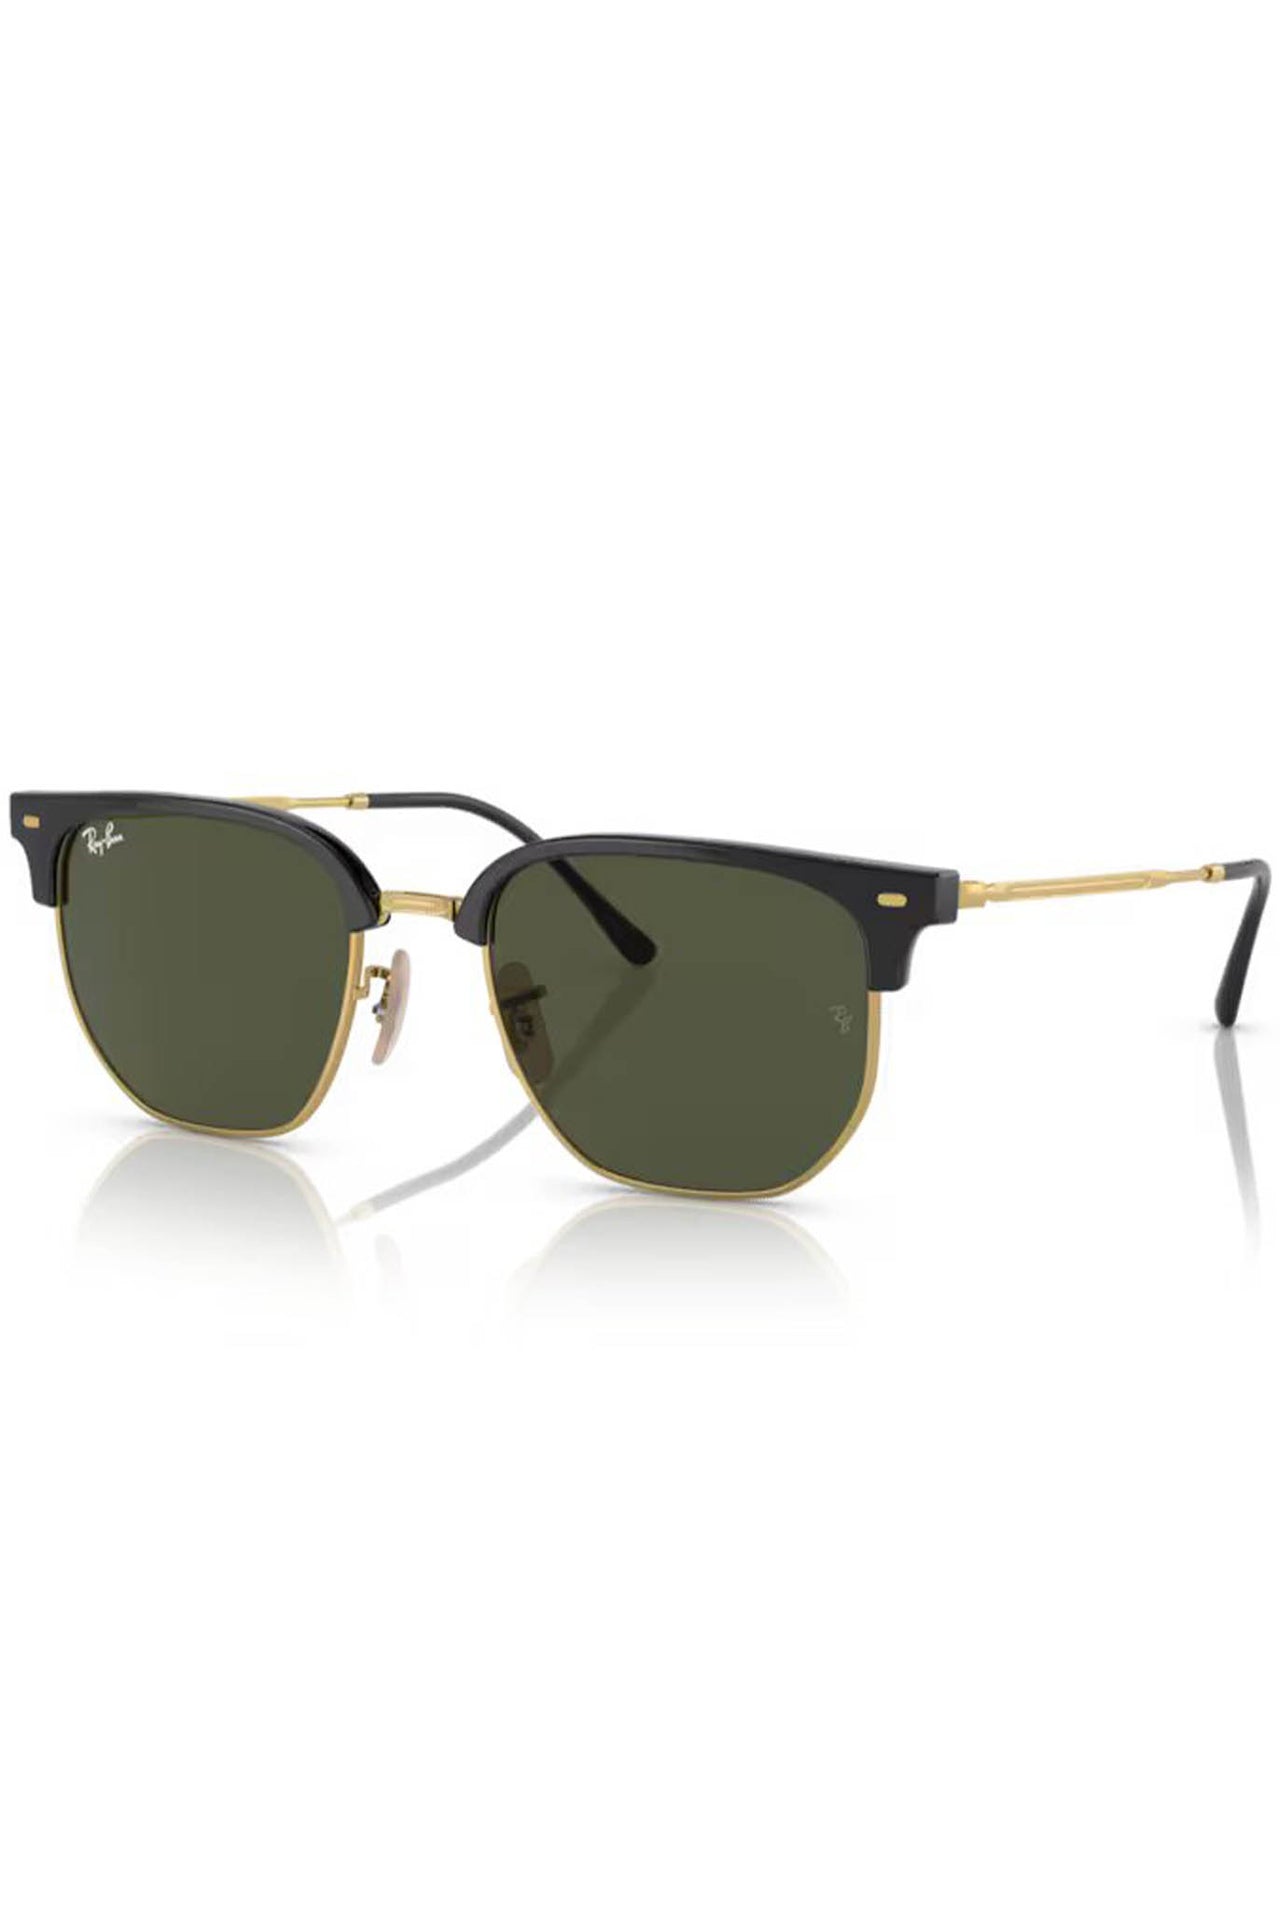 Gafas Ray-Ban New Clubmaster RB4416 601/31